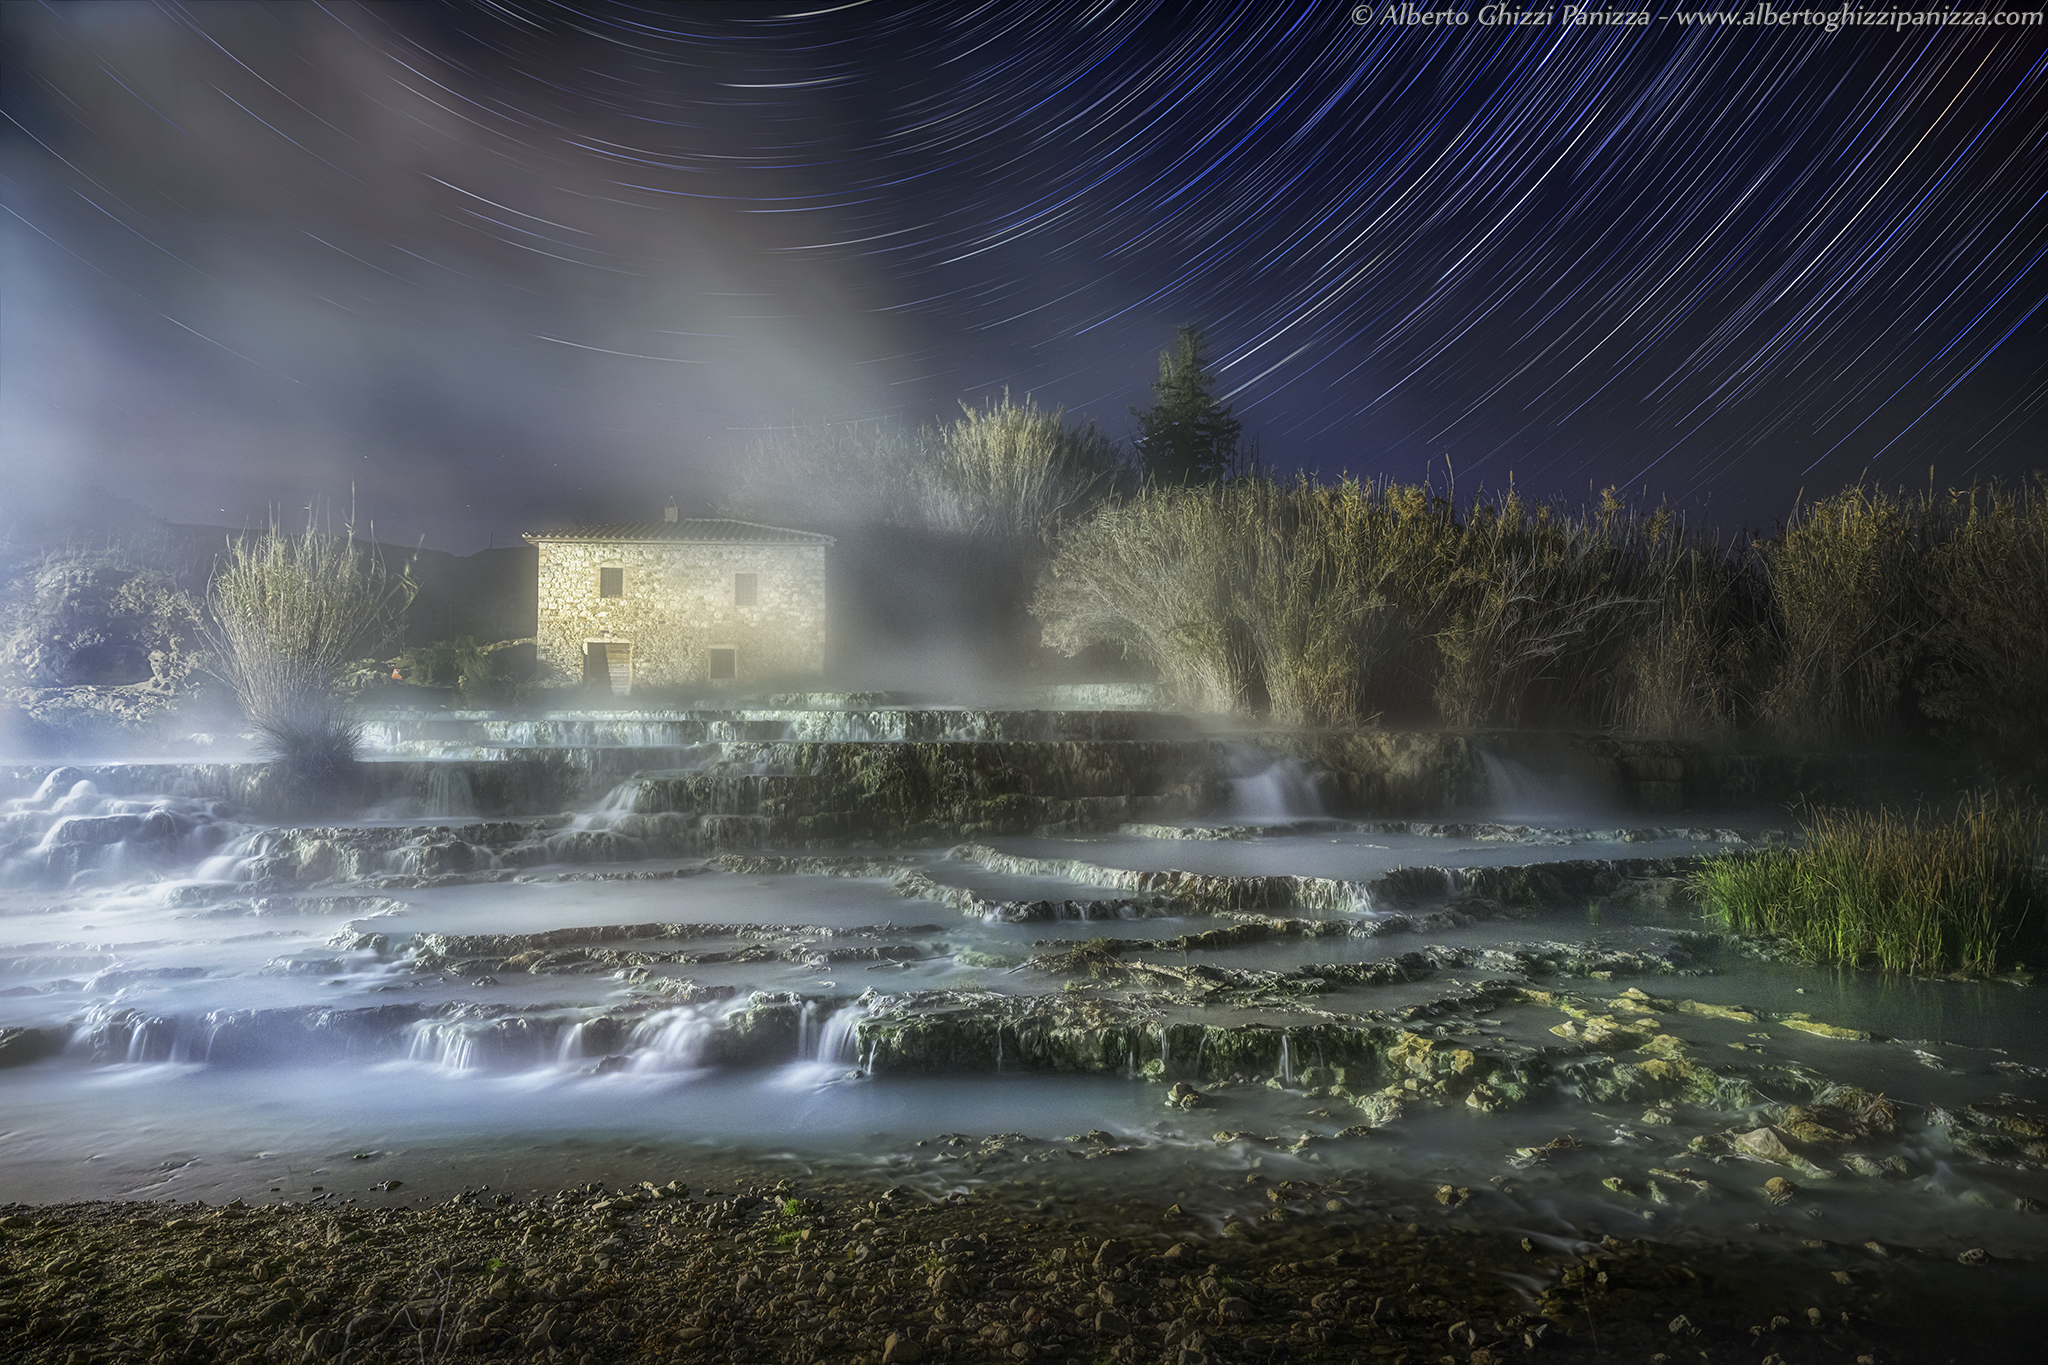 Between waterfalls, steam and stars...